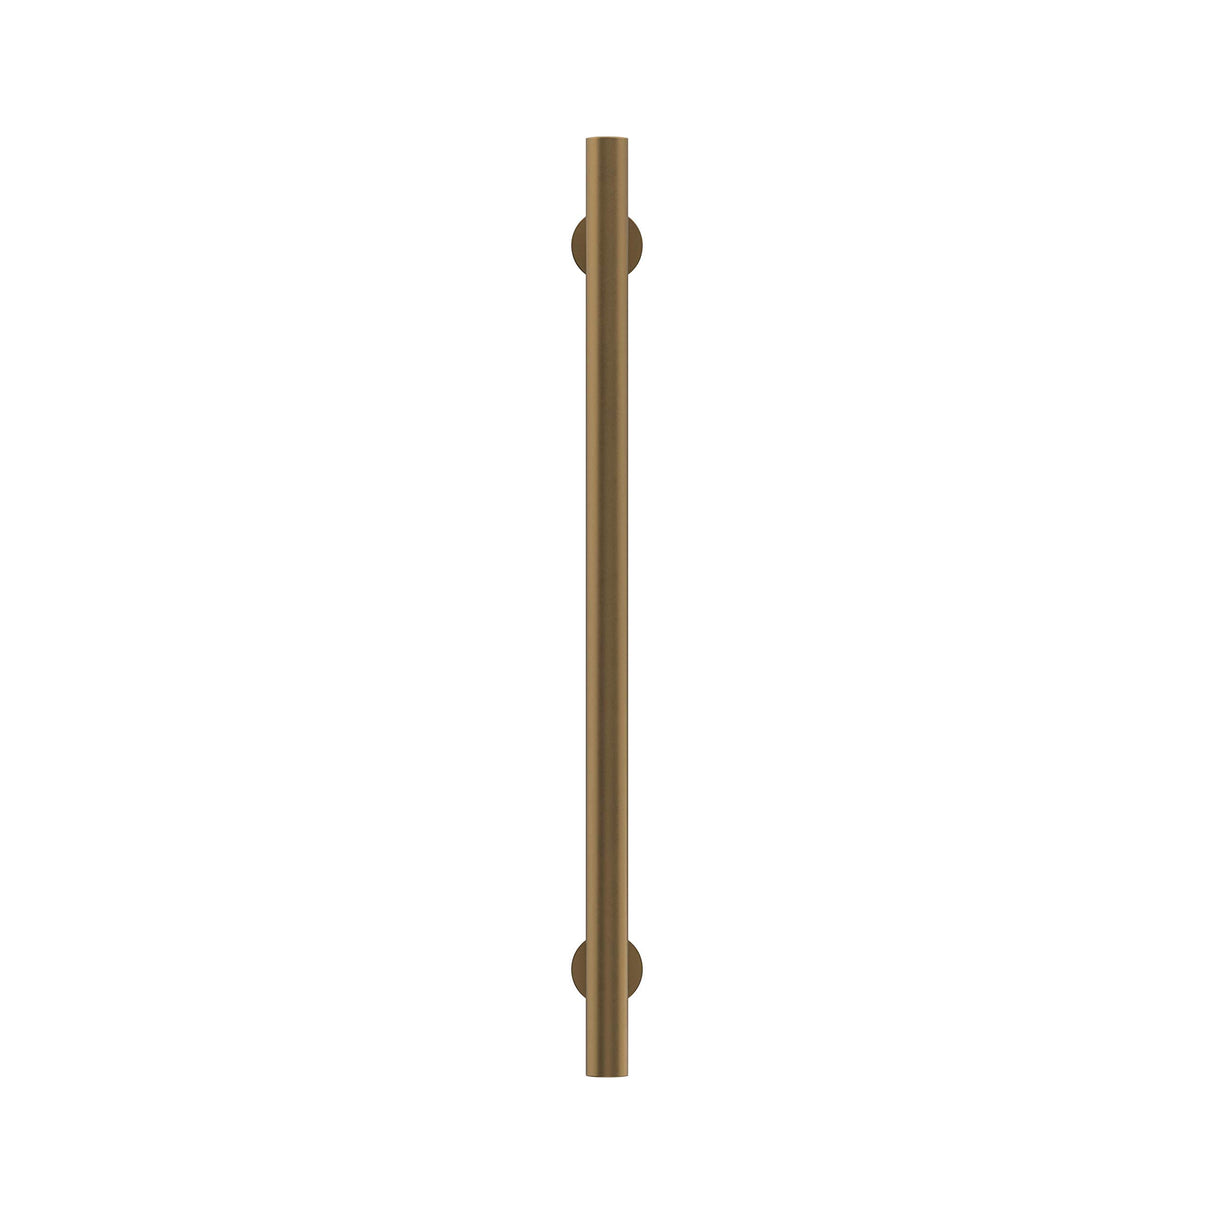 Amerock Cabinet Pull Champagne Bronze 7-9/16 inch (192 mm) Center-to-Center Radius 1 Pack Drawer Pull Cabinet Handle Cabinet Hardware